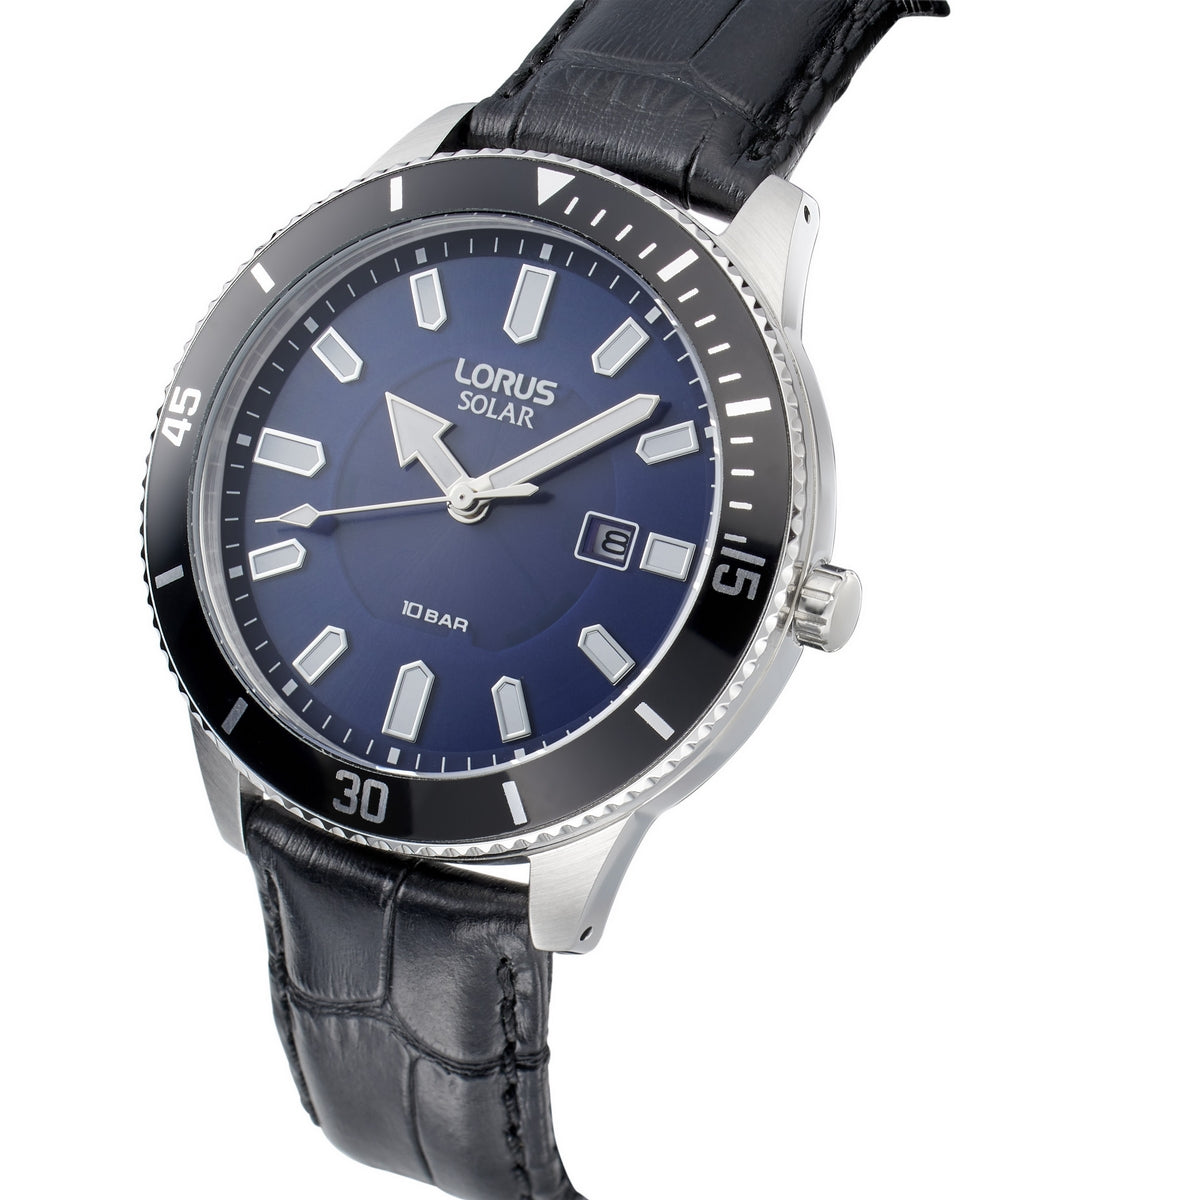 watch Moores steel strap stainless solar lorus - dia blue Jewellers